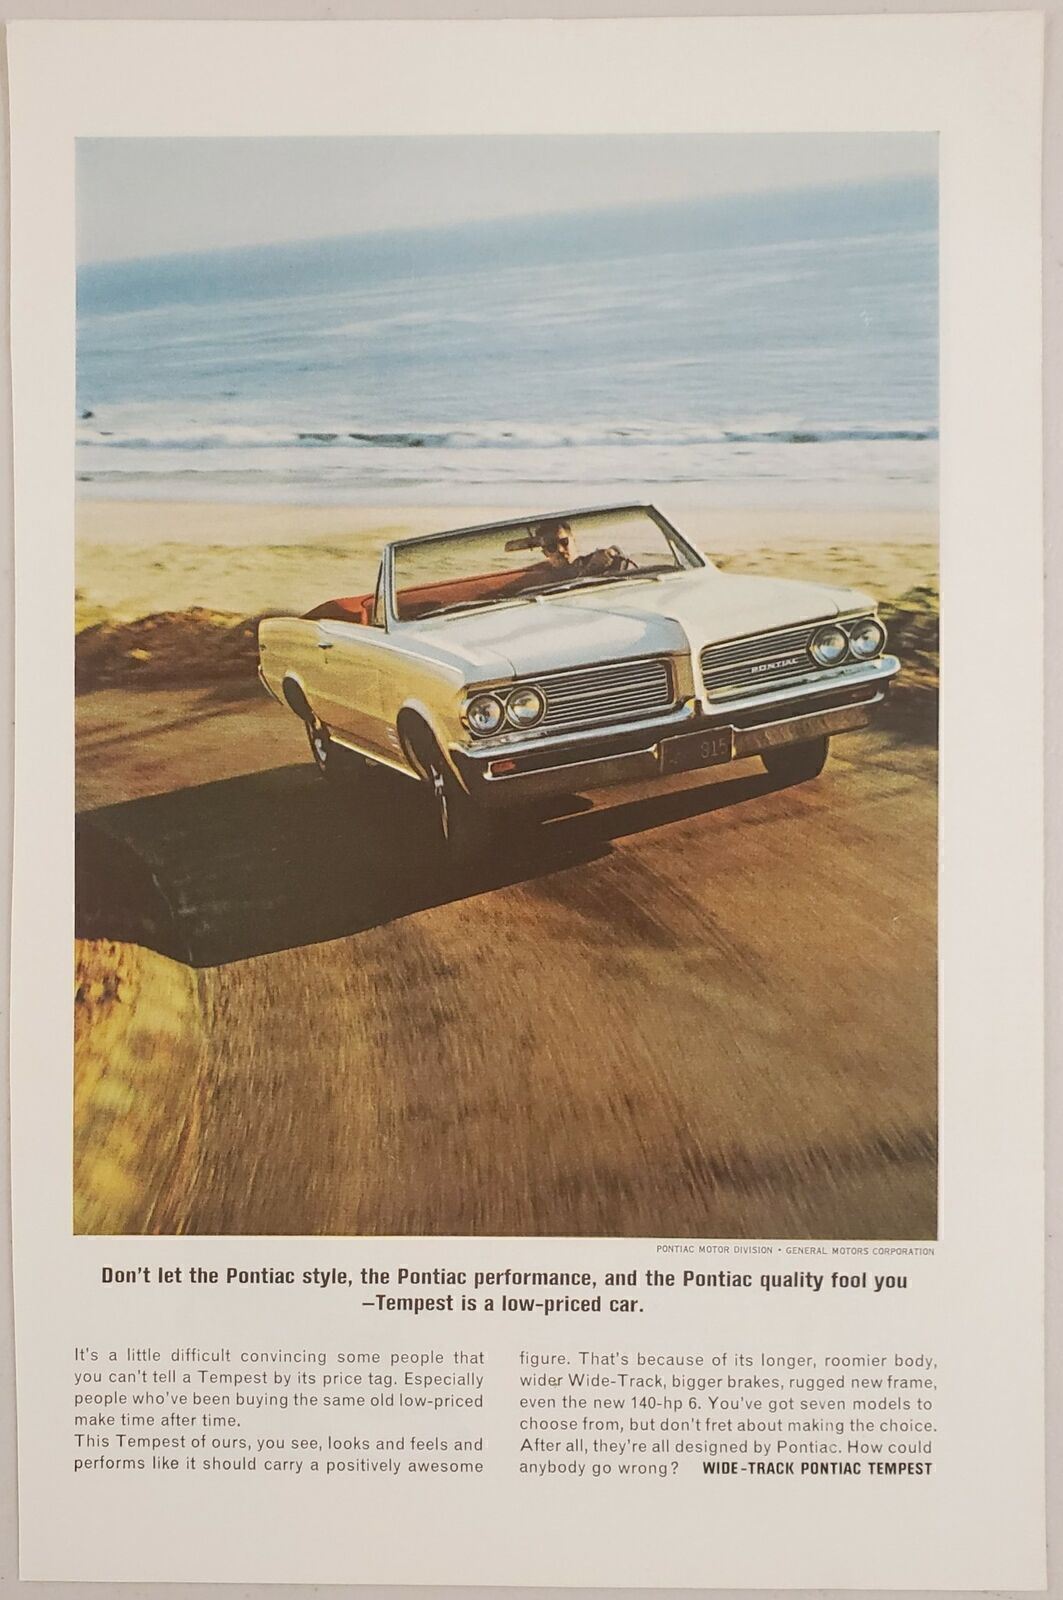 1964 Print Ad Pontiac Tempest Wide-Track Convertible on Road by Ocean